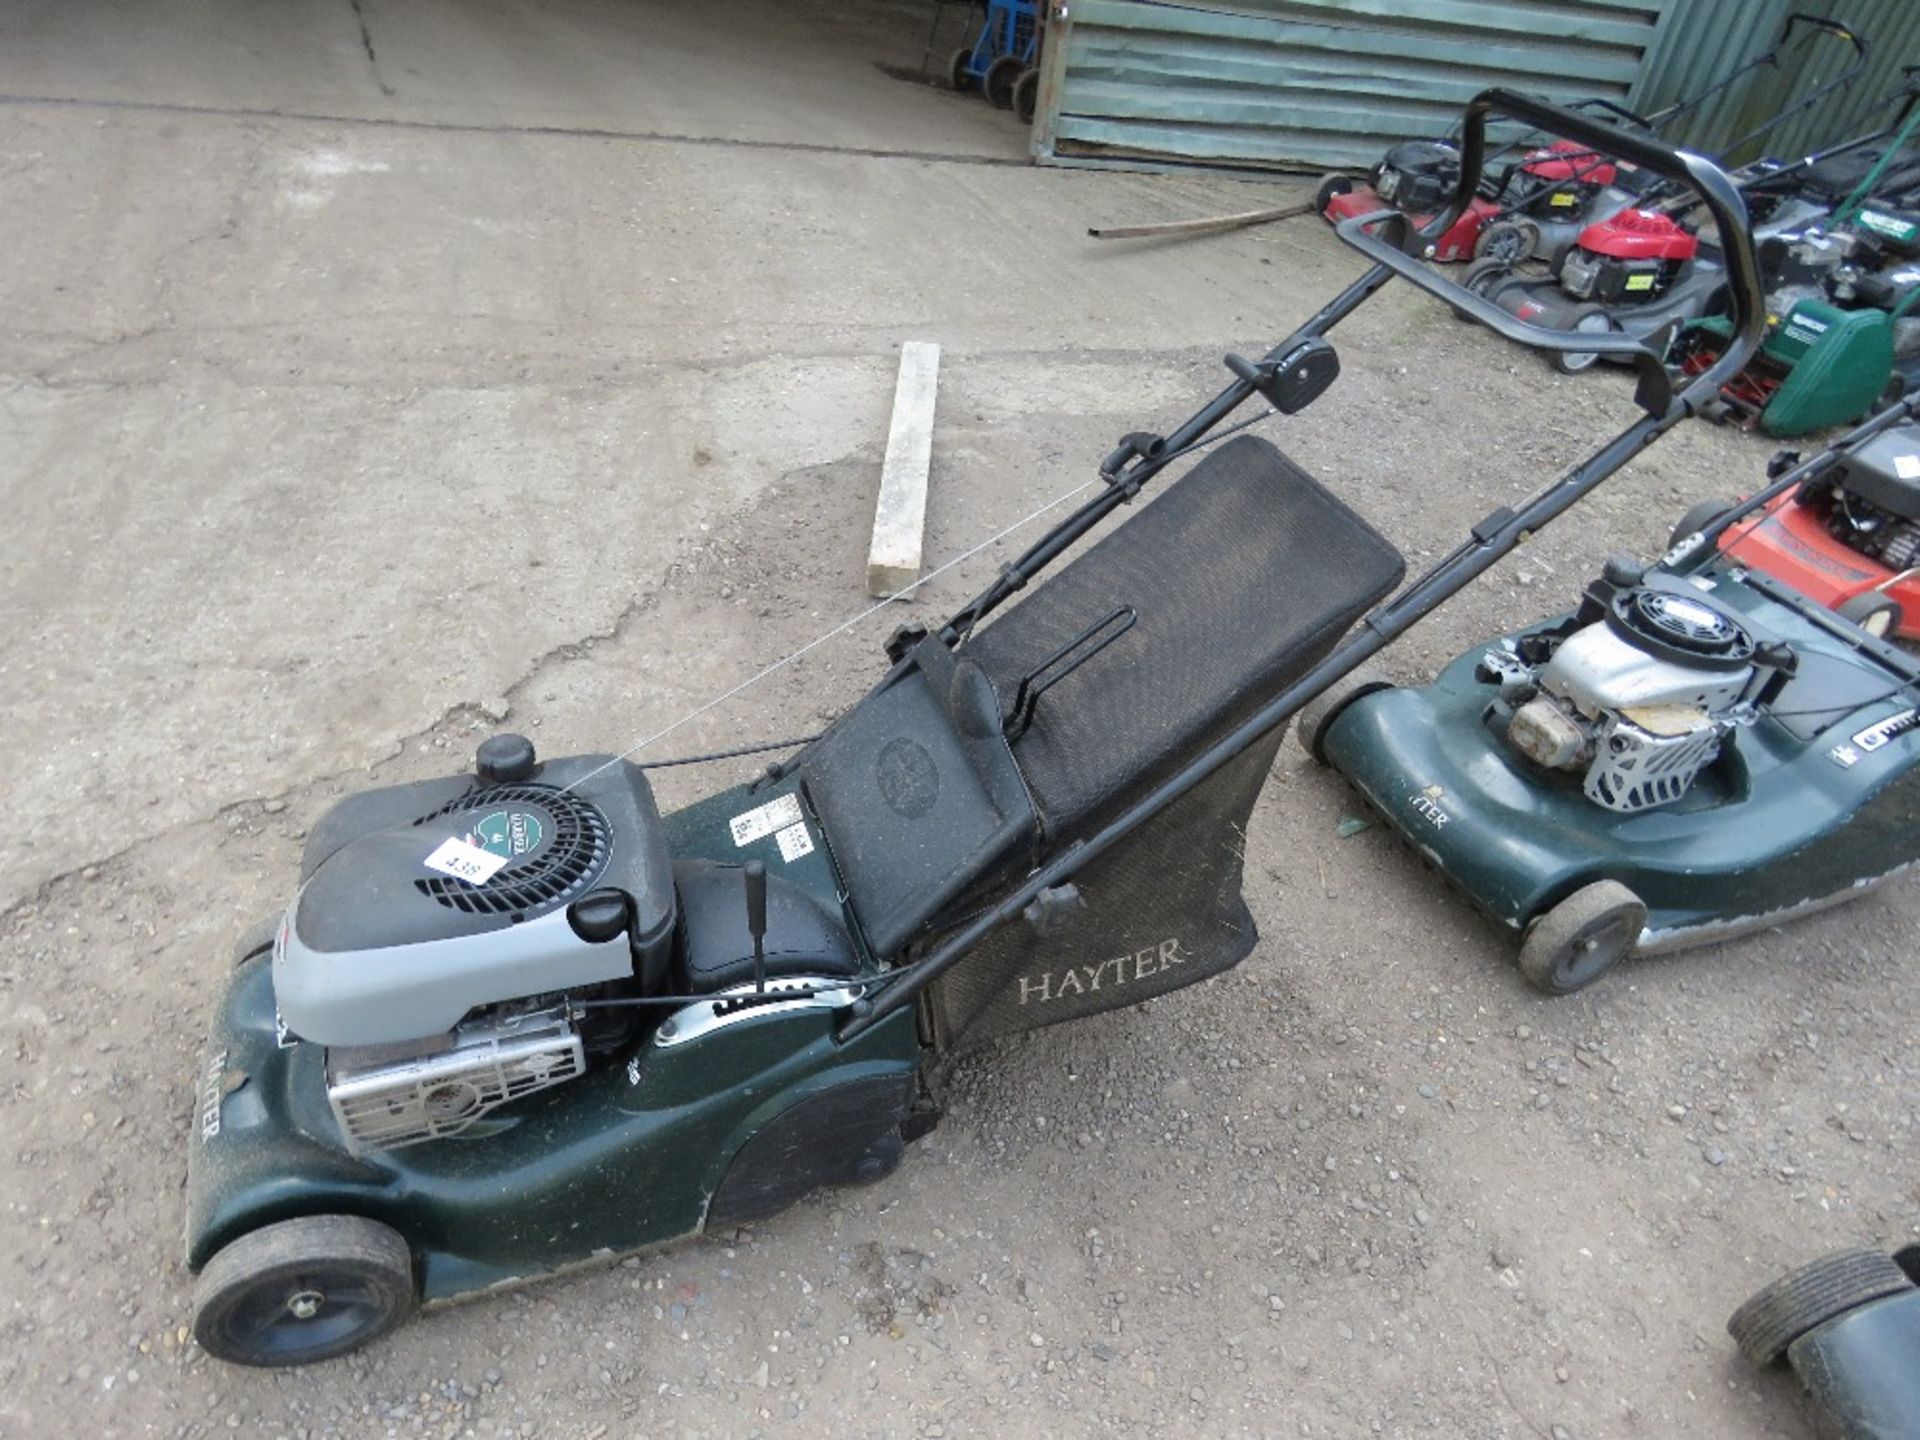 HAYTER HARRIER 41 PETROL ENGINED MOWER WITH REAR ROLLER AND COLLECTOR. ....THIS LOT IS SOLD UNDER TH